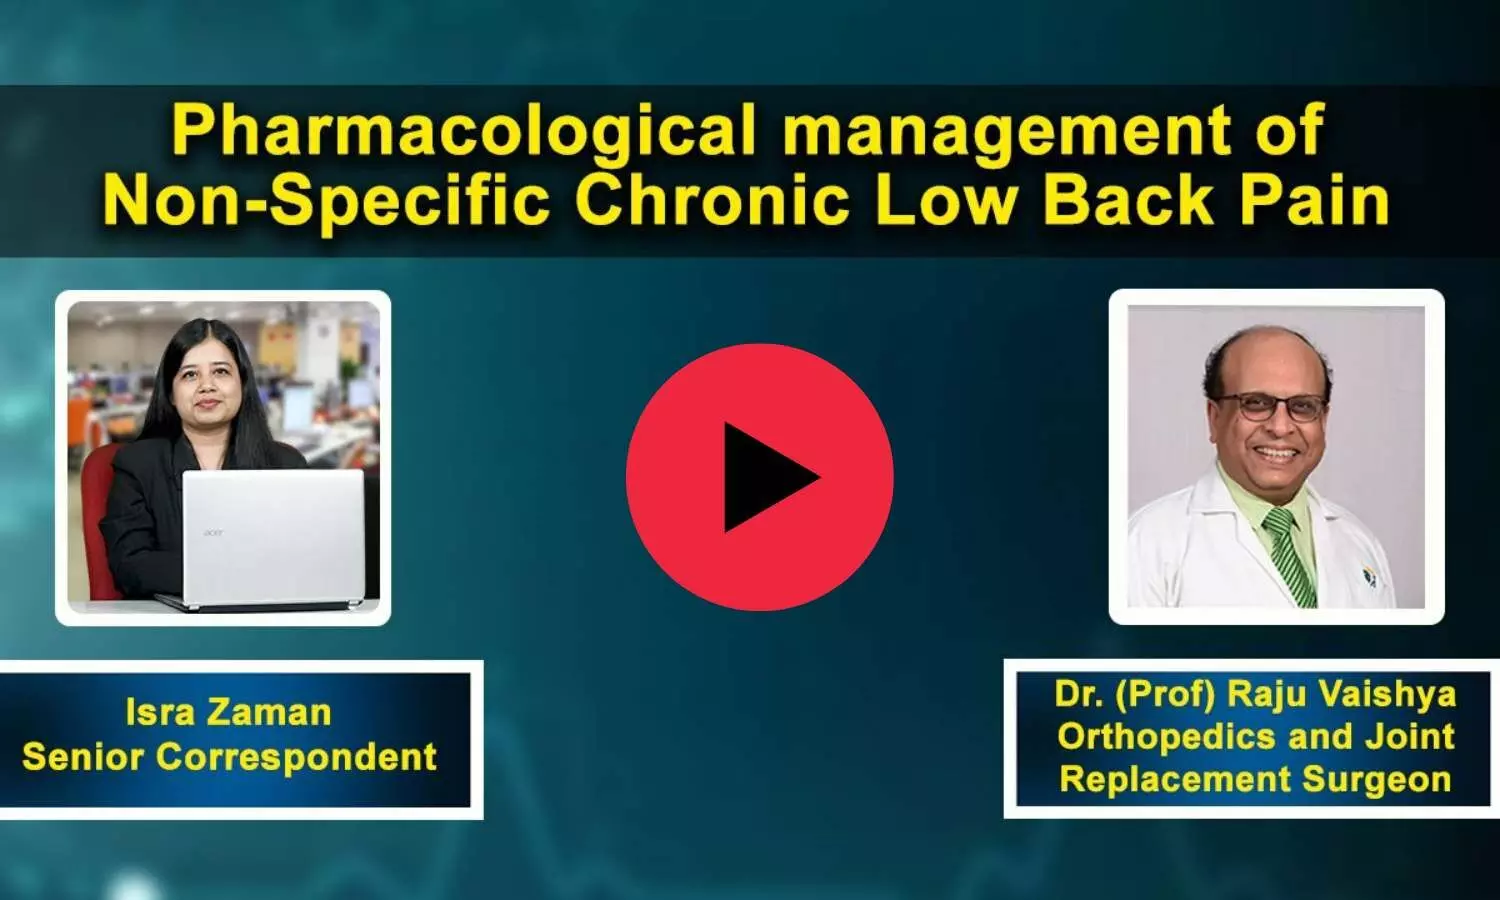 Pharmacological management of non-specific chronic low back pain Ft. Dr. Raju Vaishya